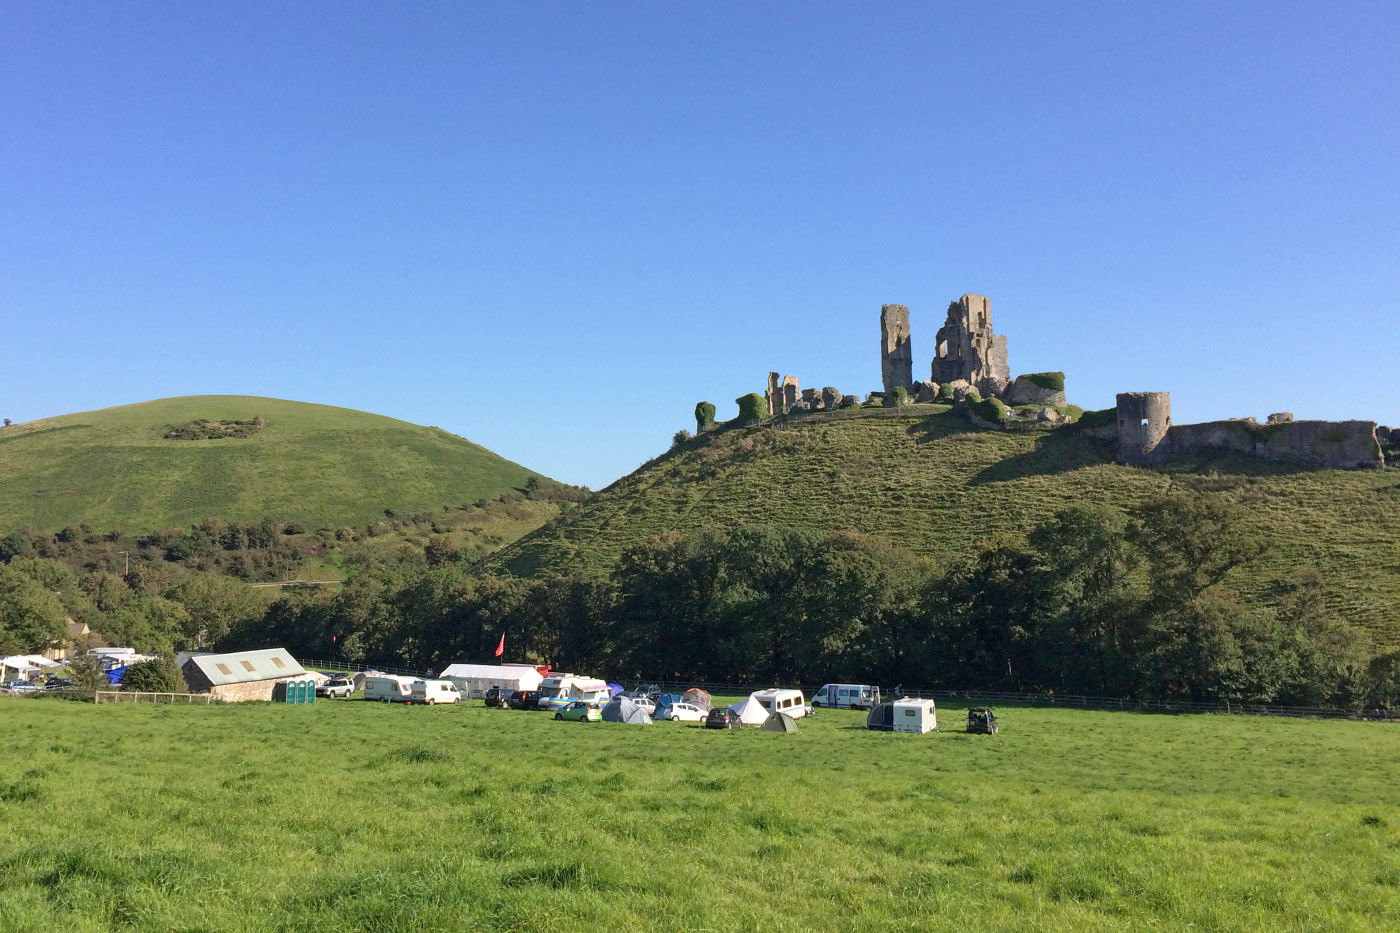 Campers at Corfe